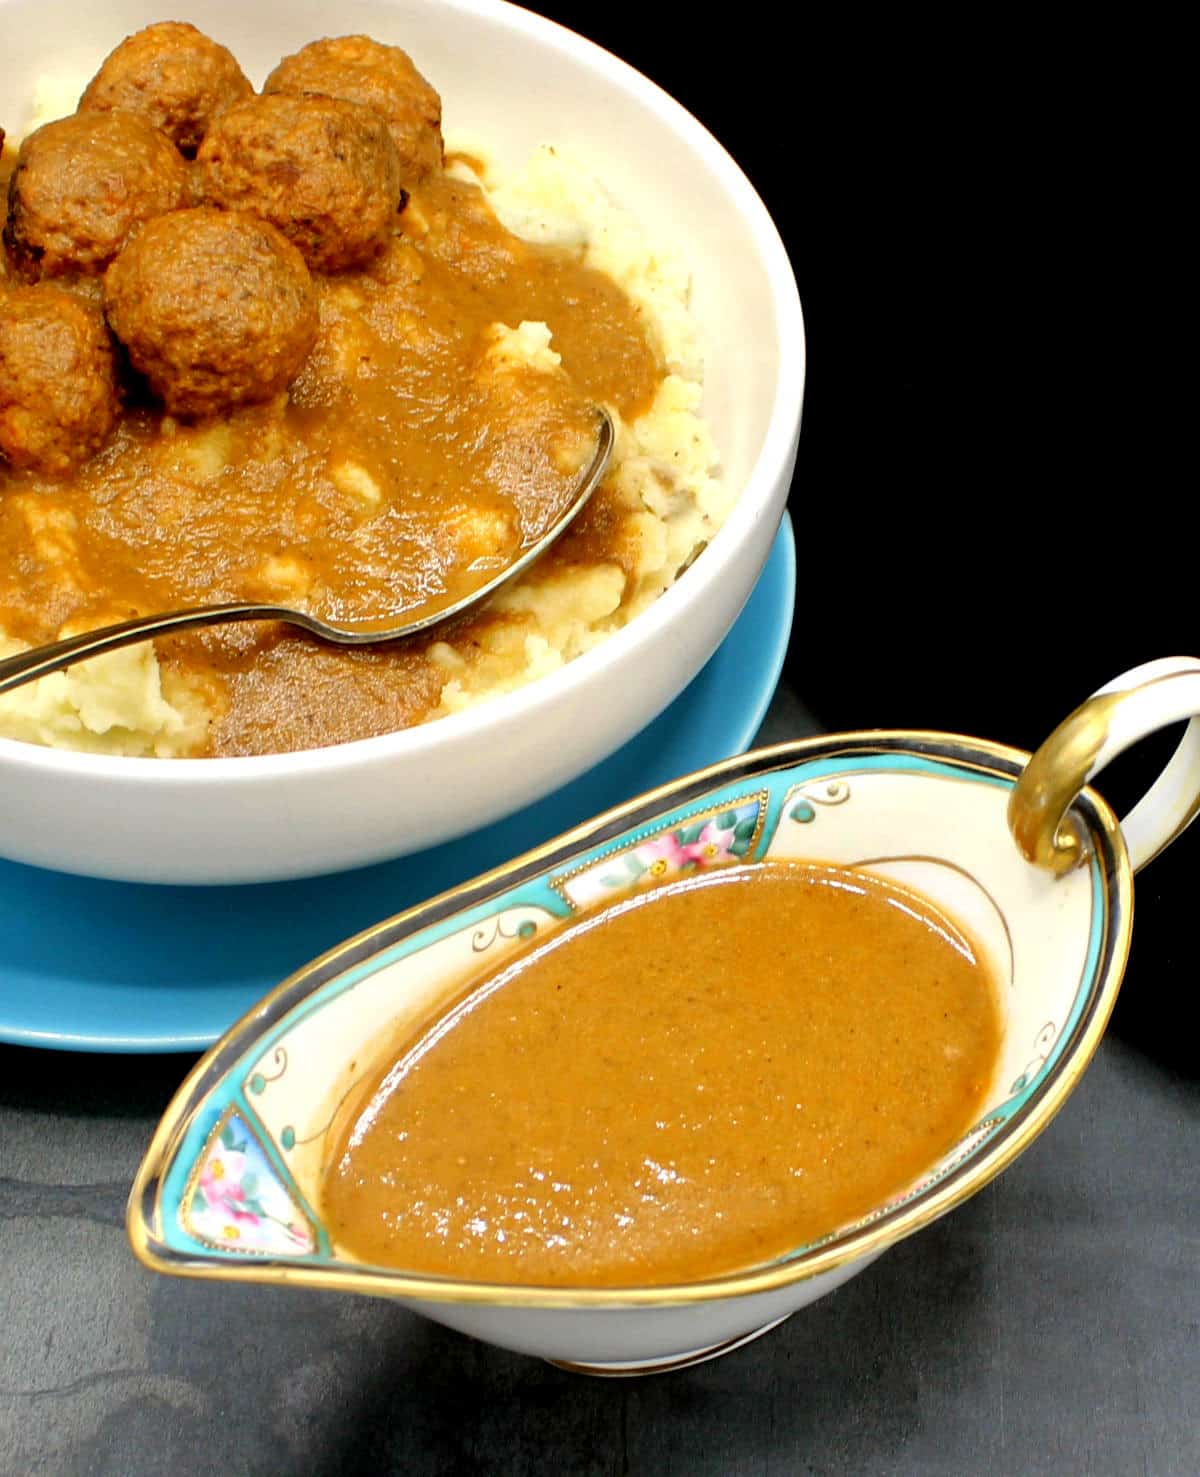 Vegan gravy in an ornate sauce boat with a bowl of vegan meatballs and mashed potatoes with gravy in the back.